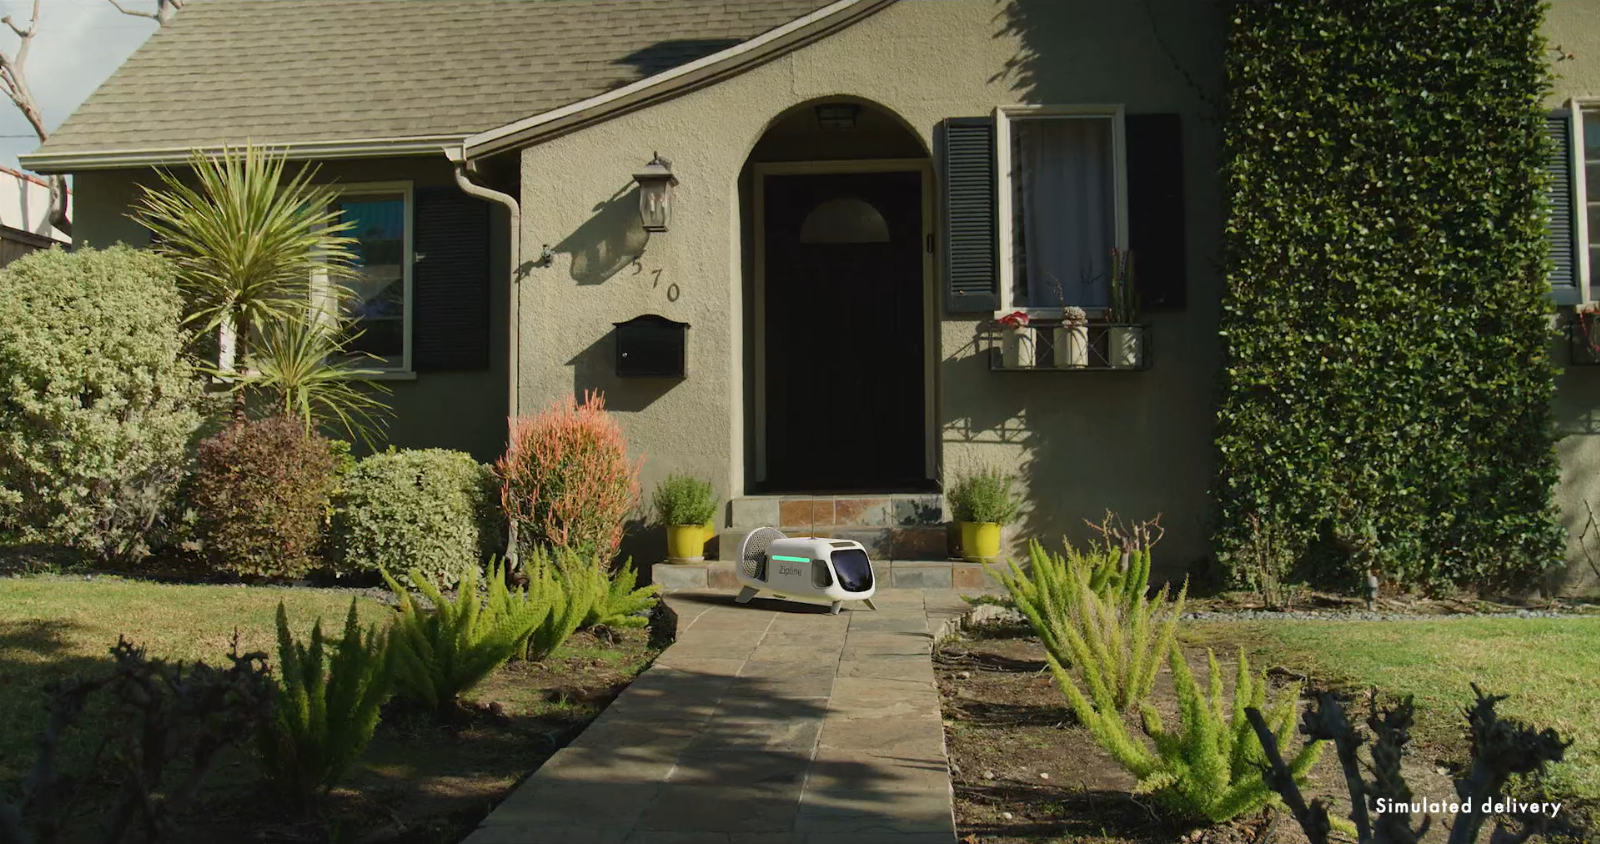 Zipline unveils cute little droid to make drone delivery more accurate